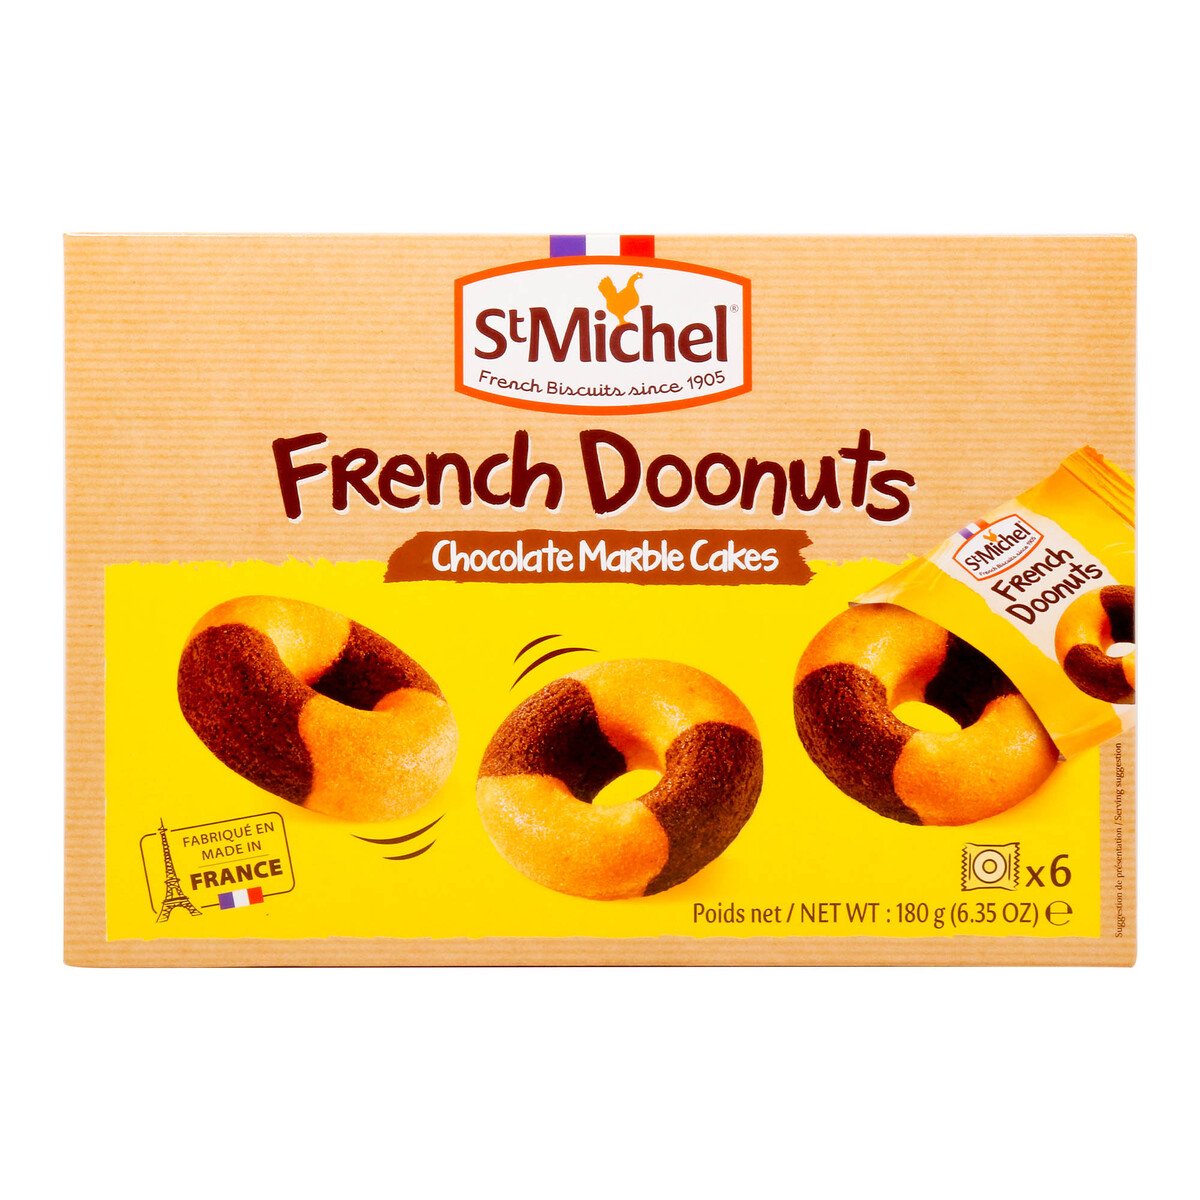 St Michel French Doonuts Chocolate Marble Cake 180 g